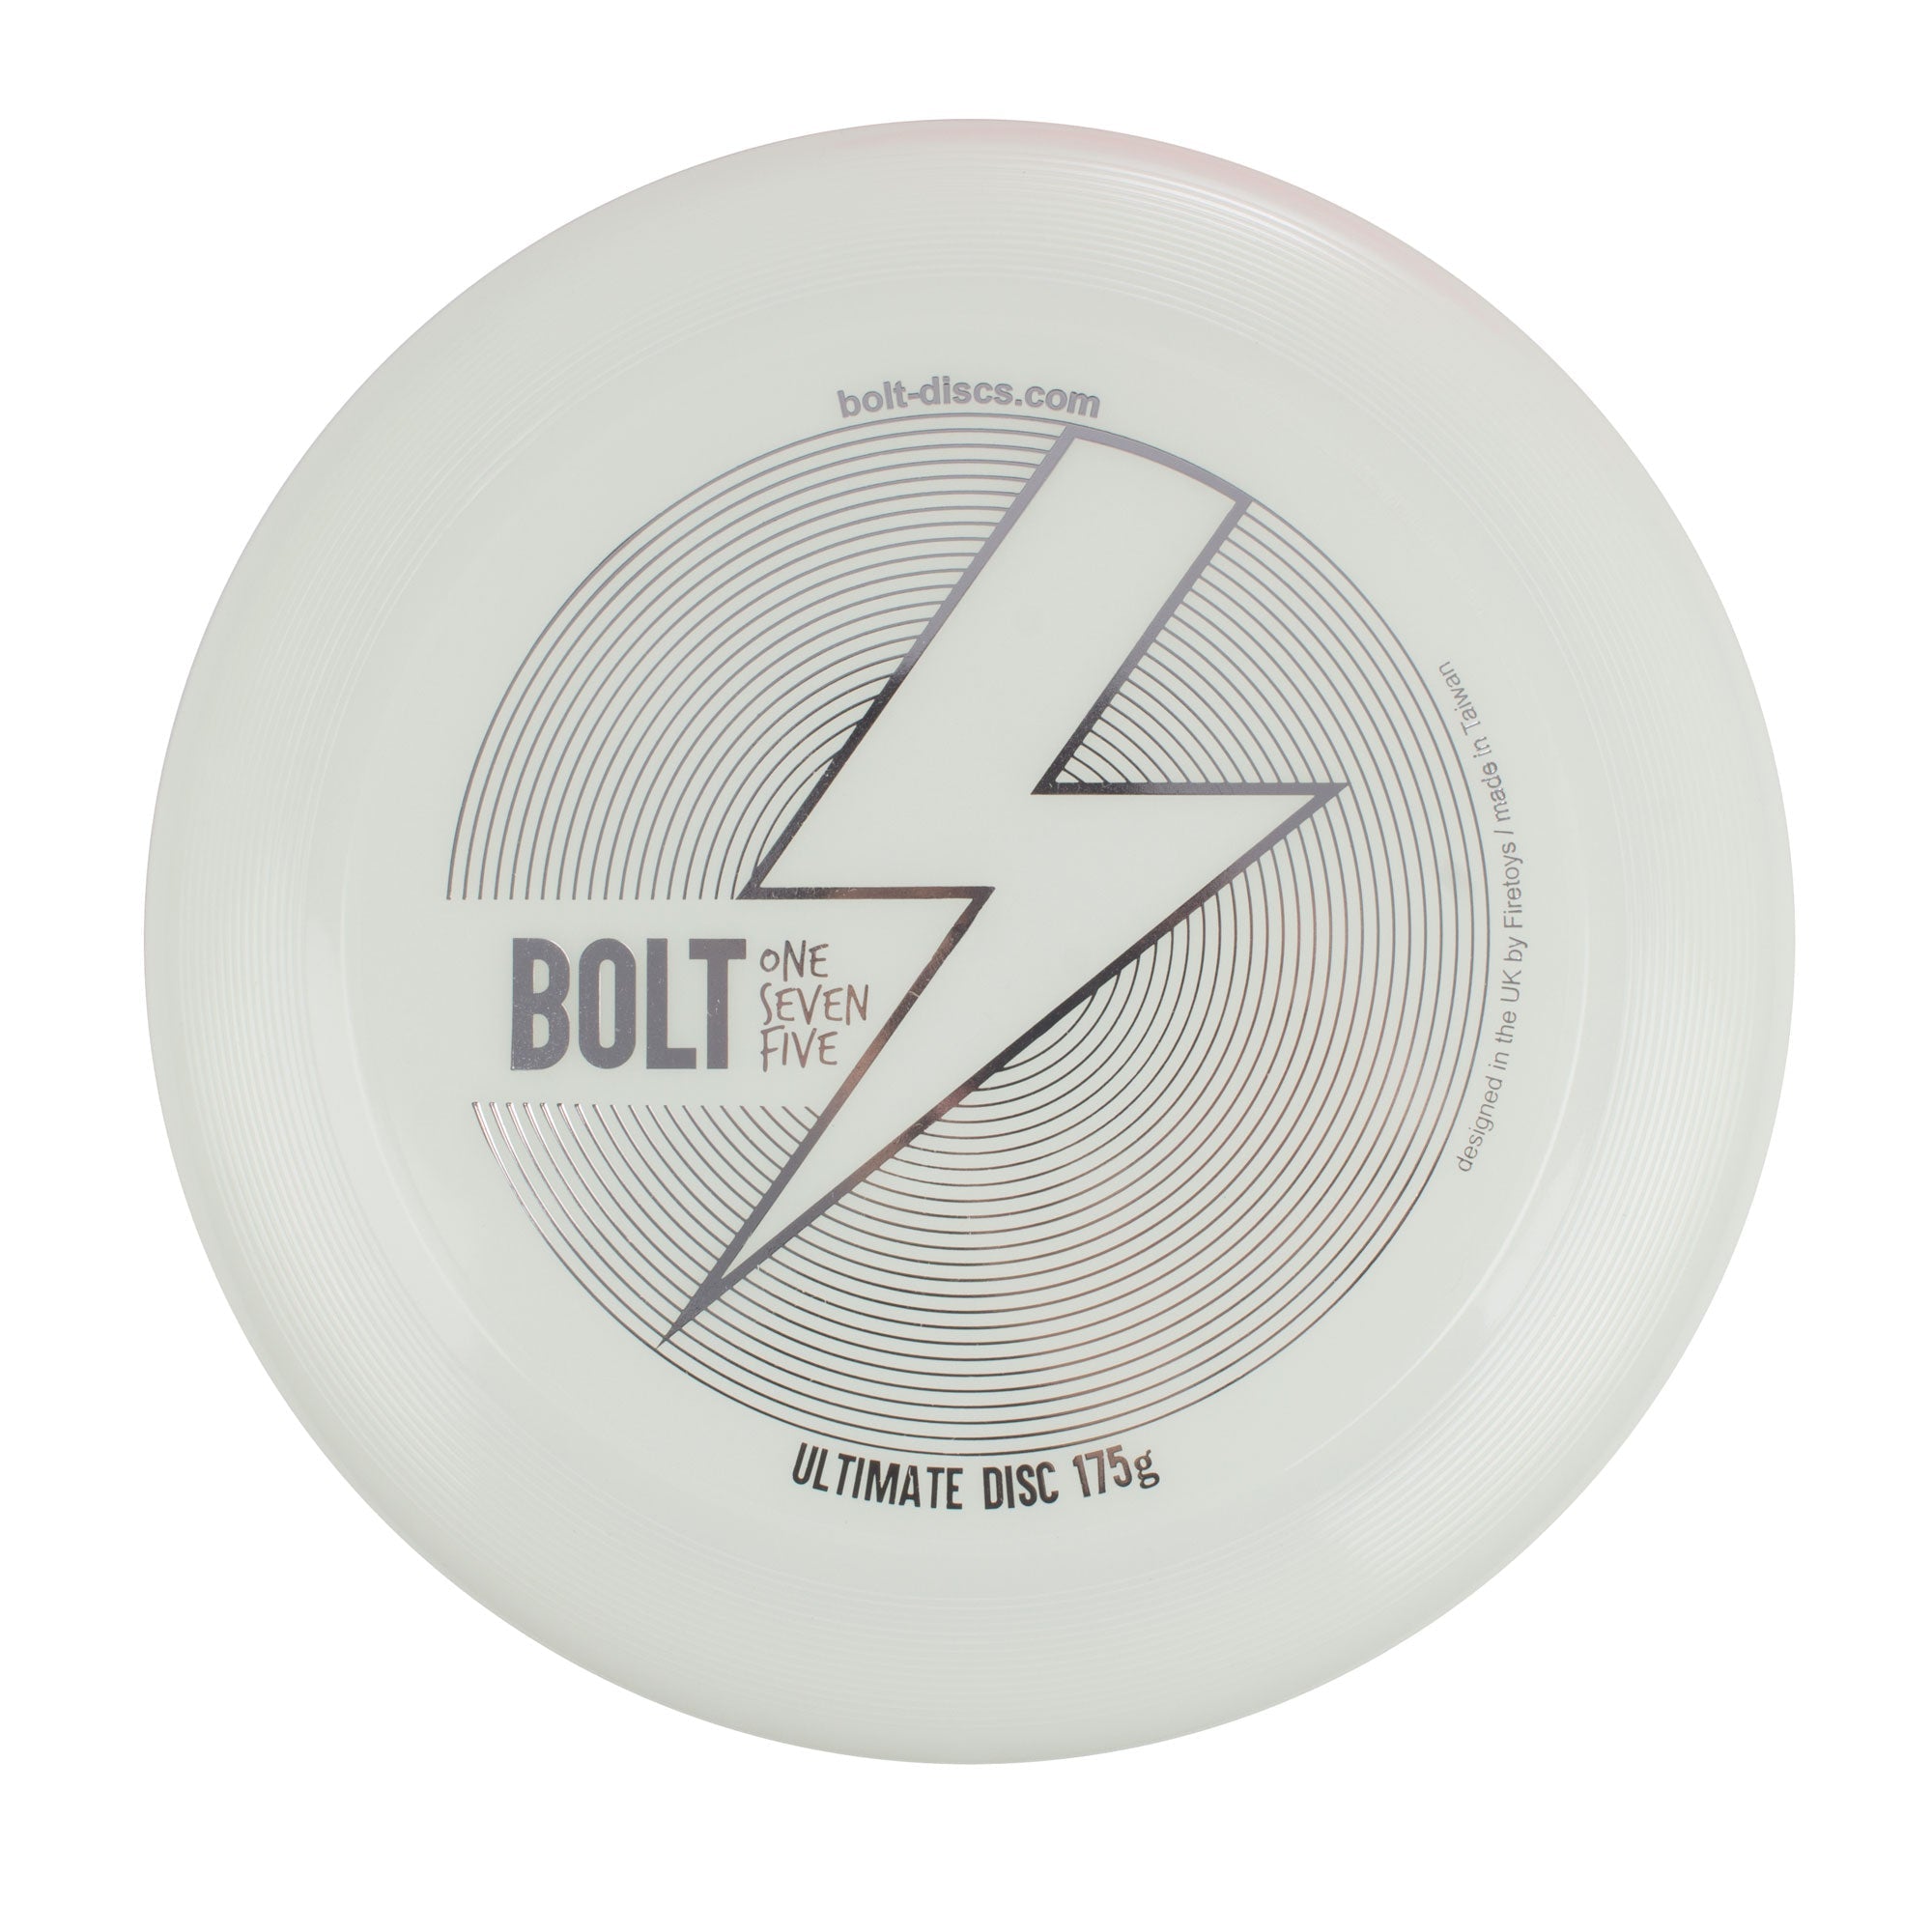 Glow BOLT frisbee from a front angle